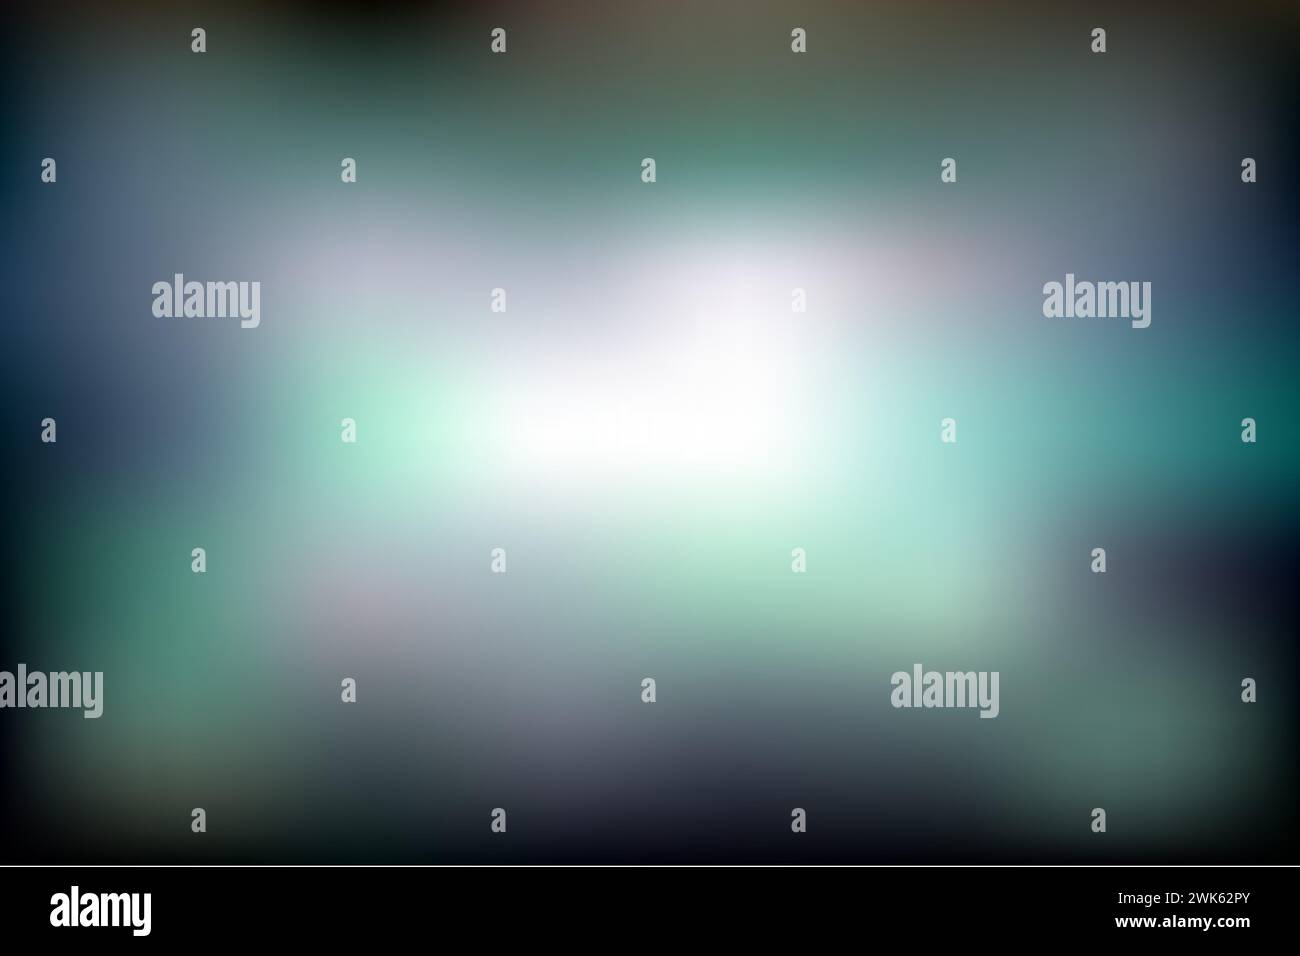 Light blurred shine abstract background vector. Stock Vector